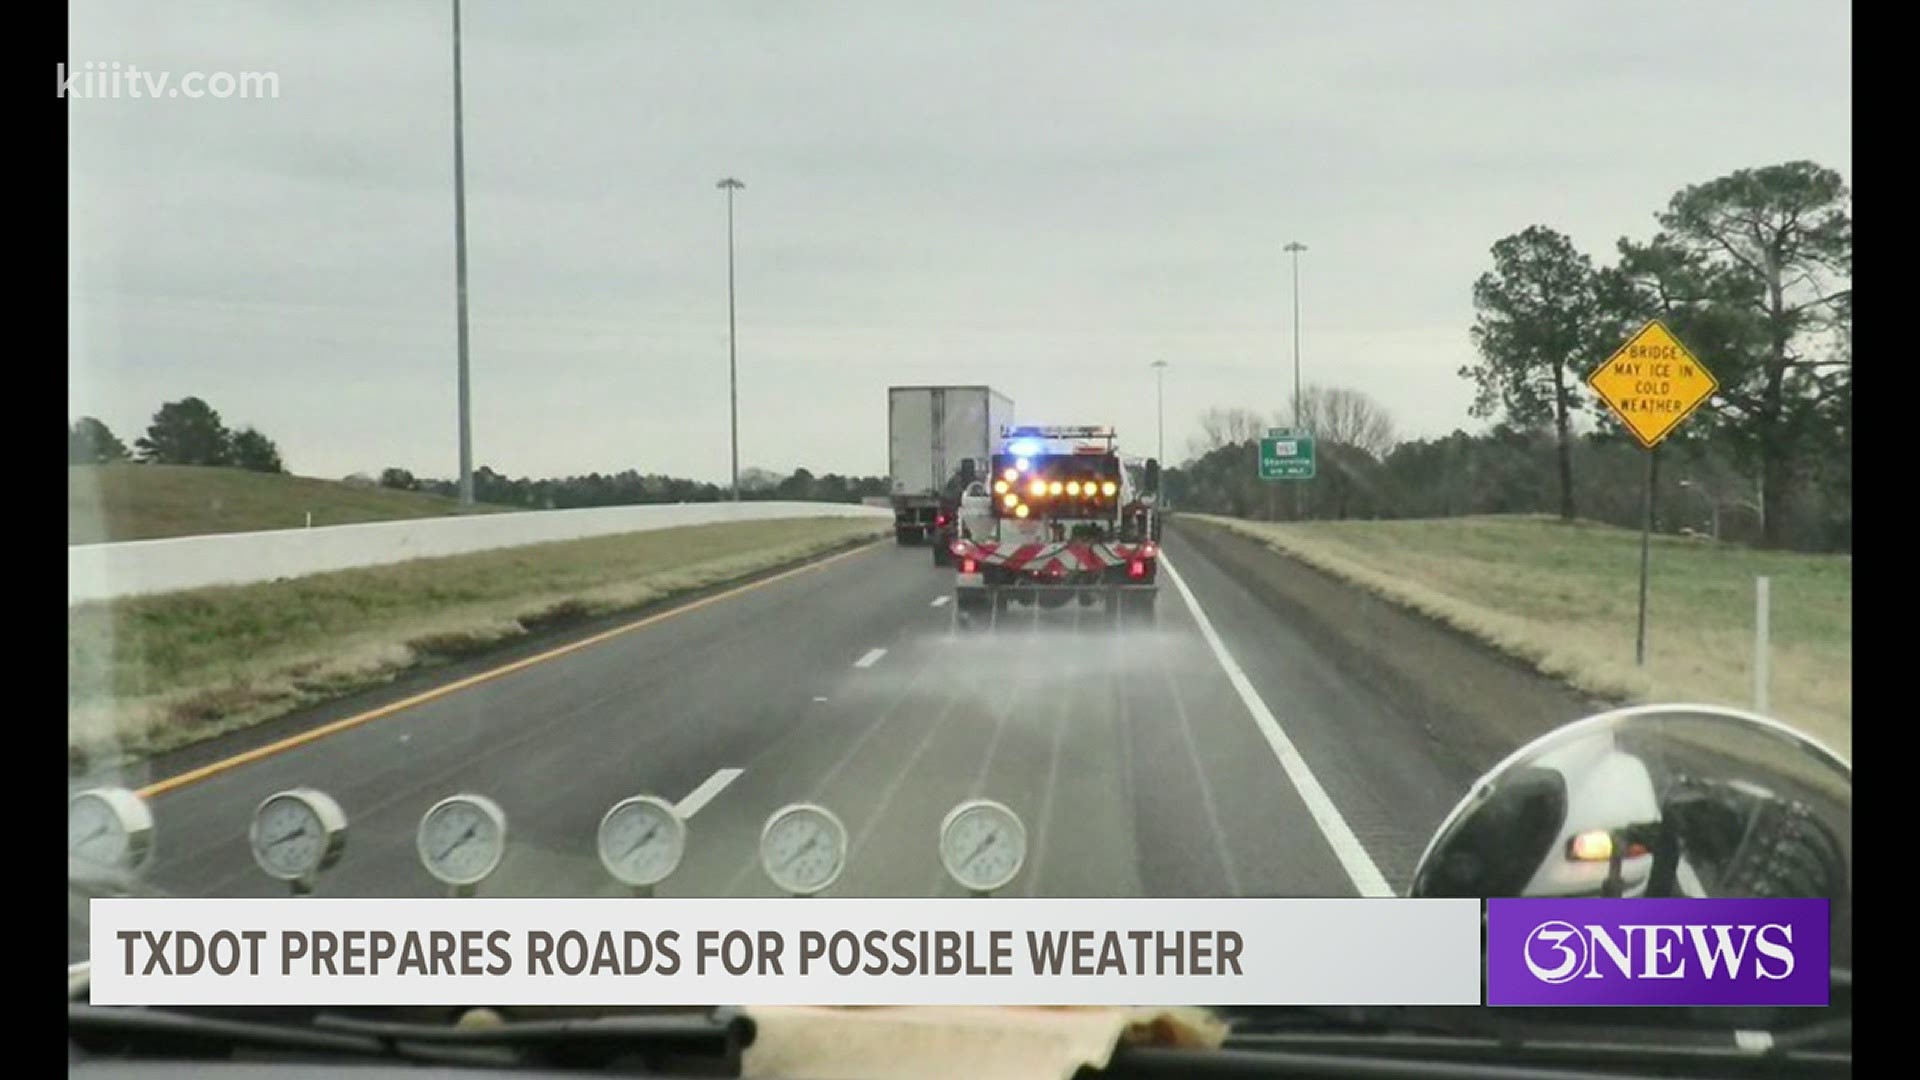 The possibility of winter weather in Northern parts of the Coastal Bend prompted crews to make roads safer for drivers.